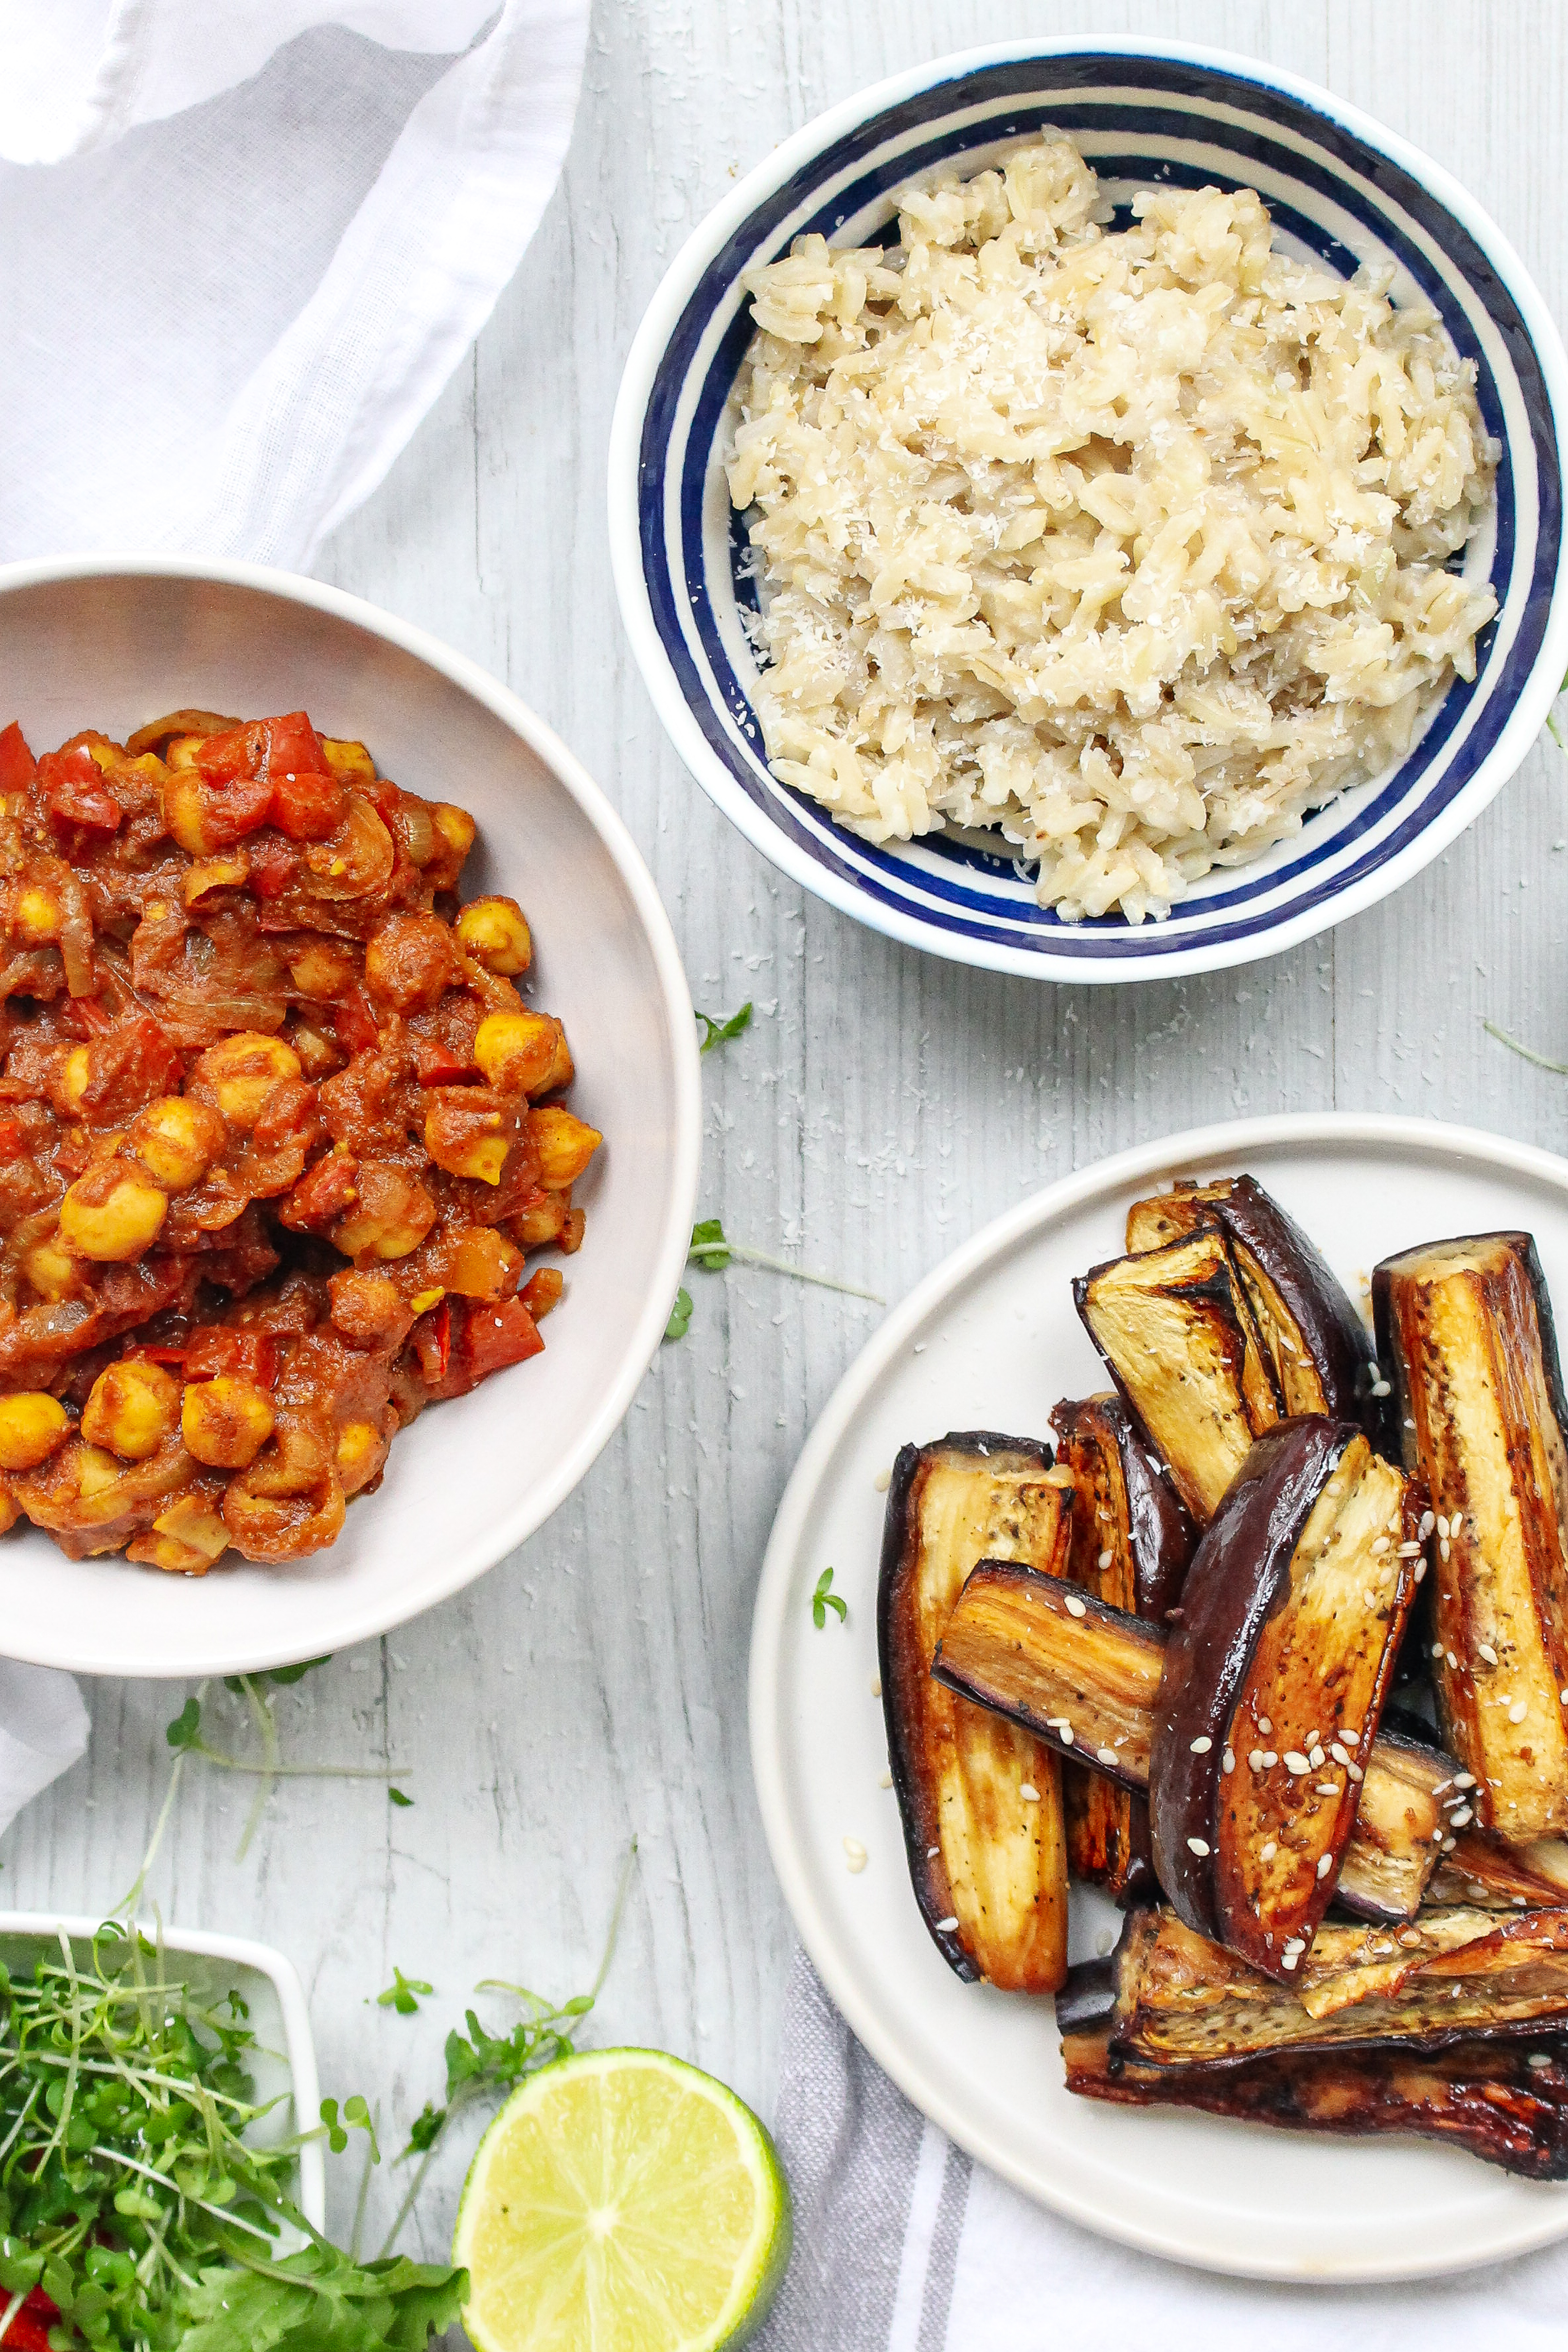 Sticky Asian Aubergine with Coconut Rice and Curried Chickpeas